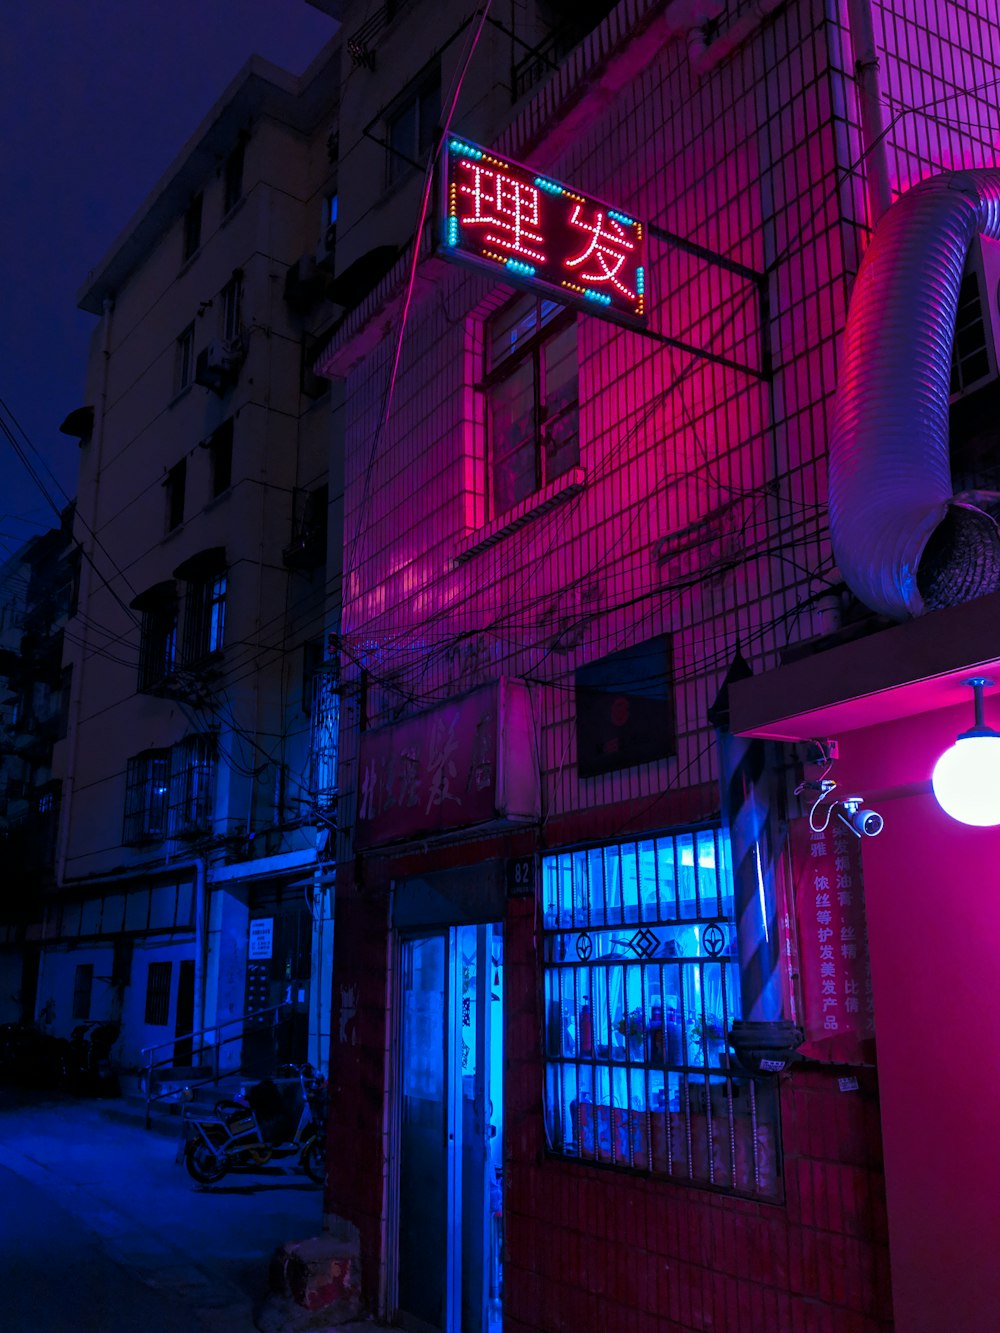 China Neon Picture. Download Free Image